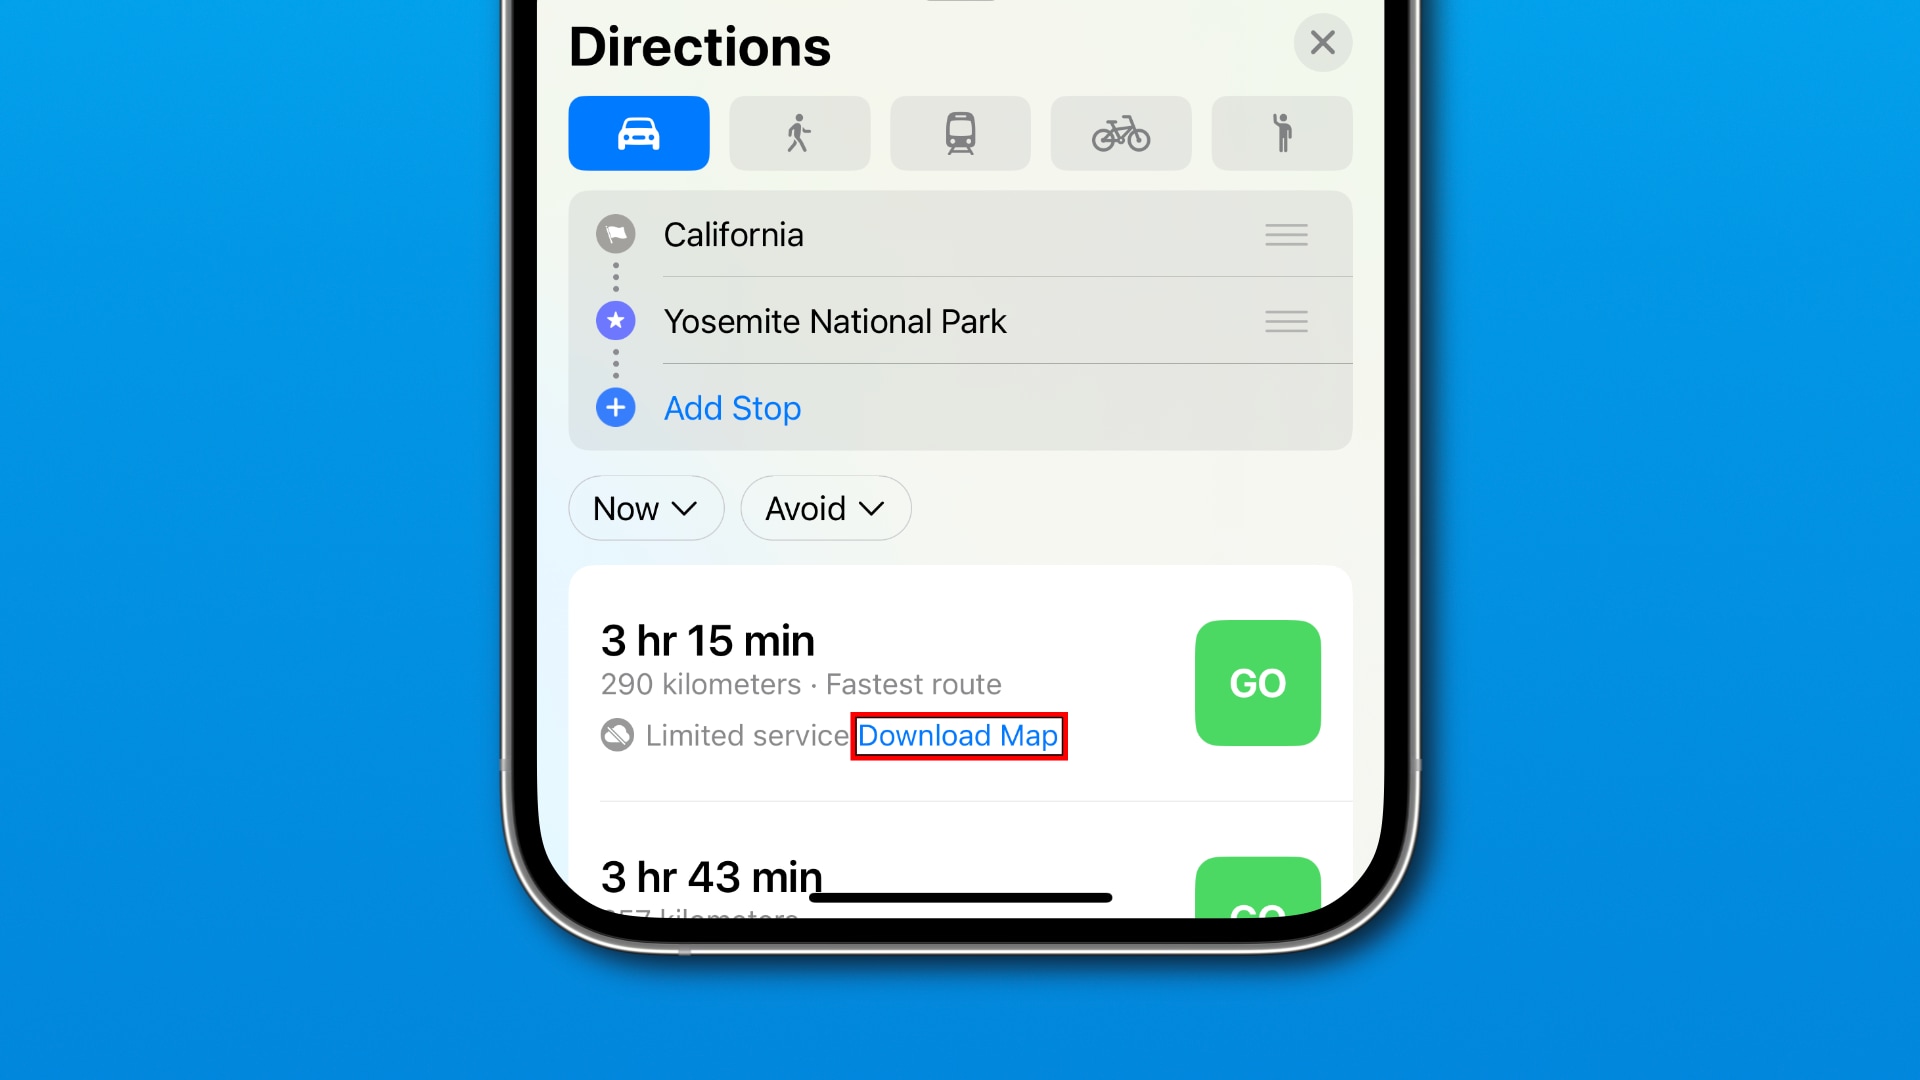 Apple Maps on iOS 17 preemptively offers to download offline maps ahead of time